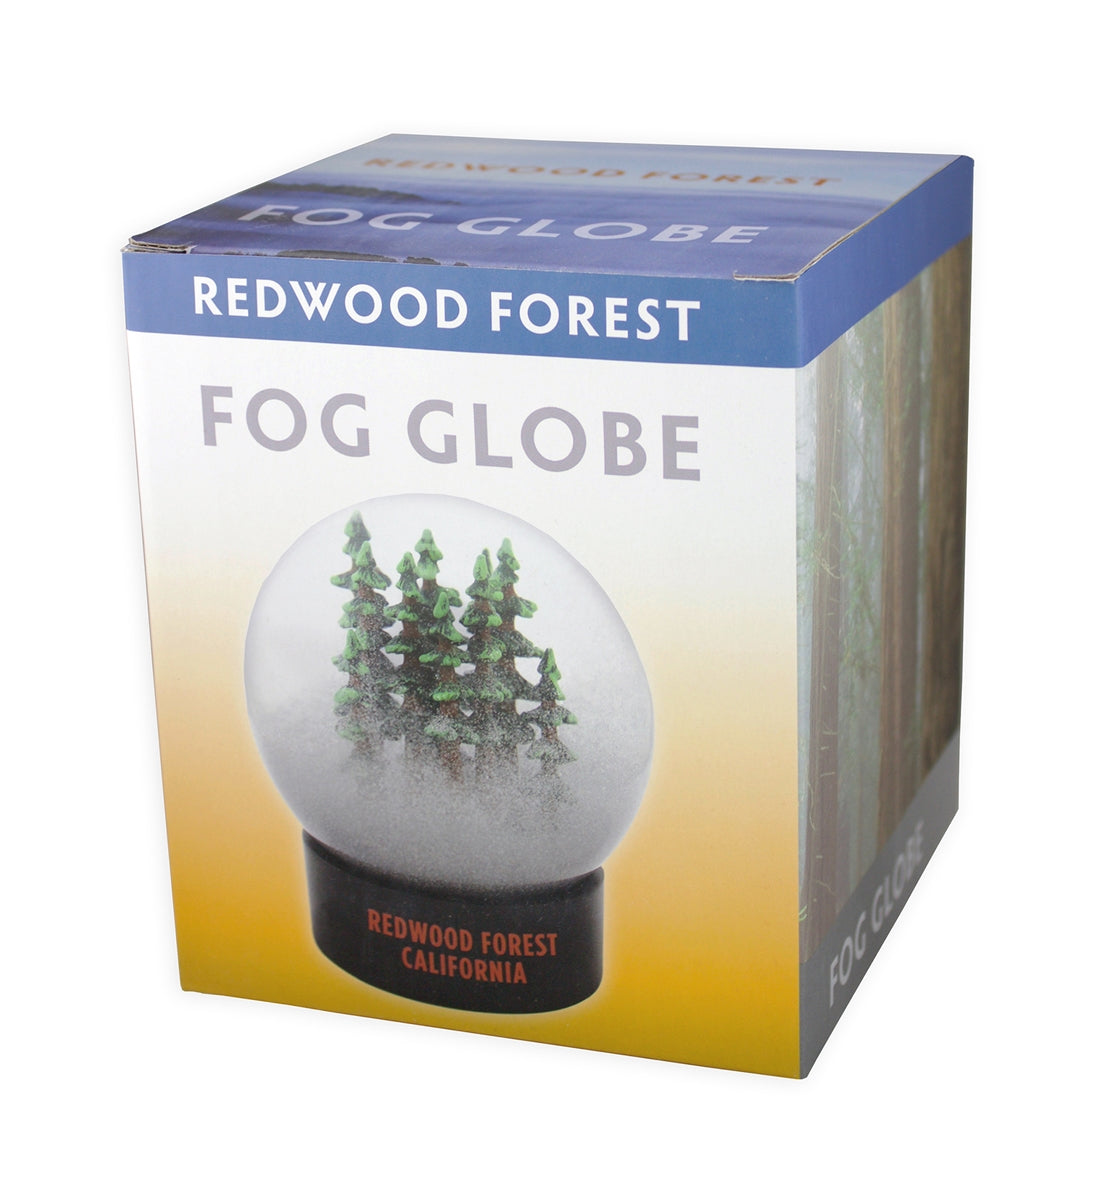 California Redwood Forest Fog Globe, designed and produced by the Golden Gate National Parks Conservancy.